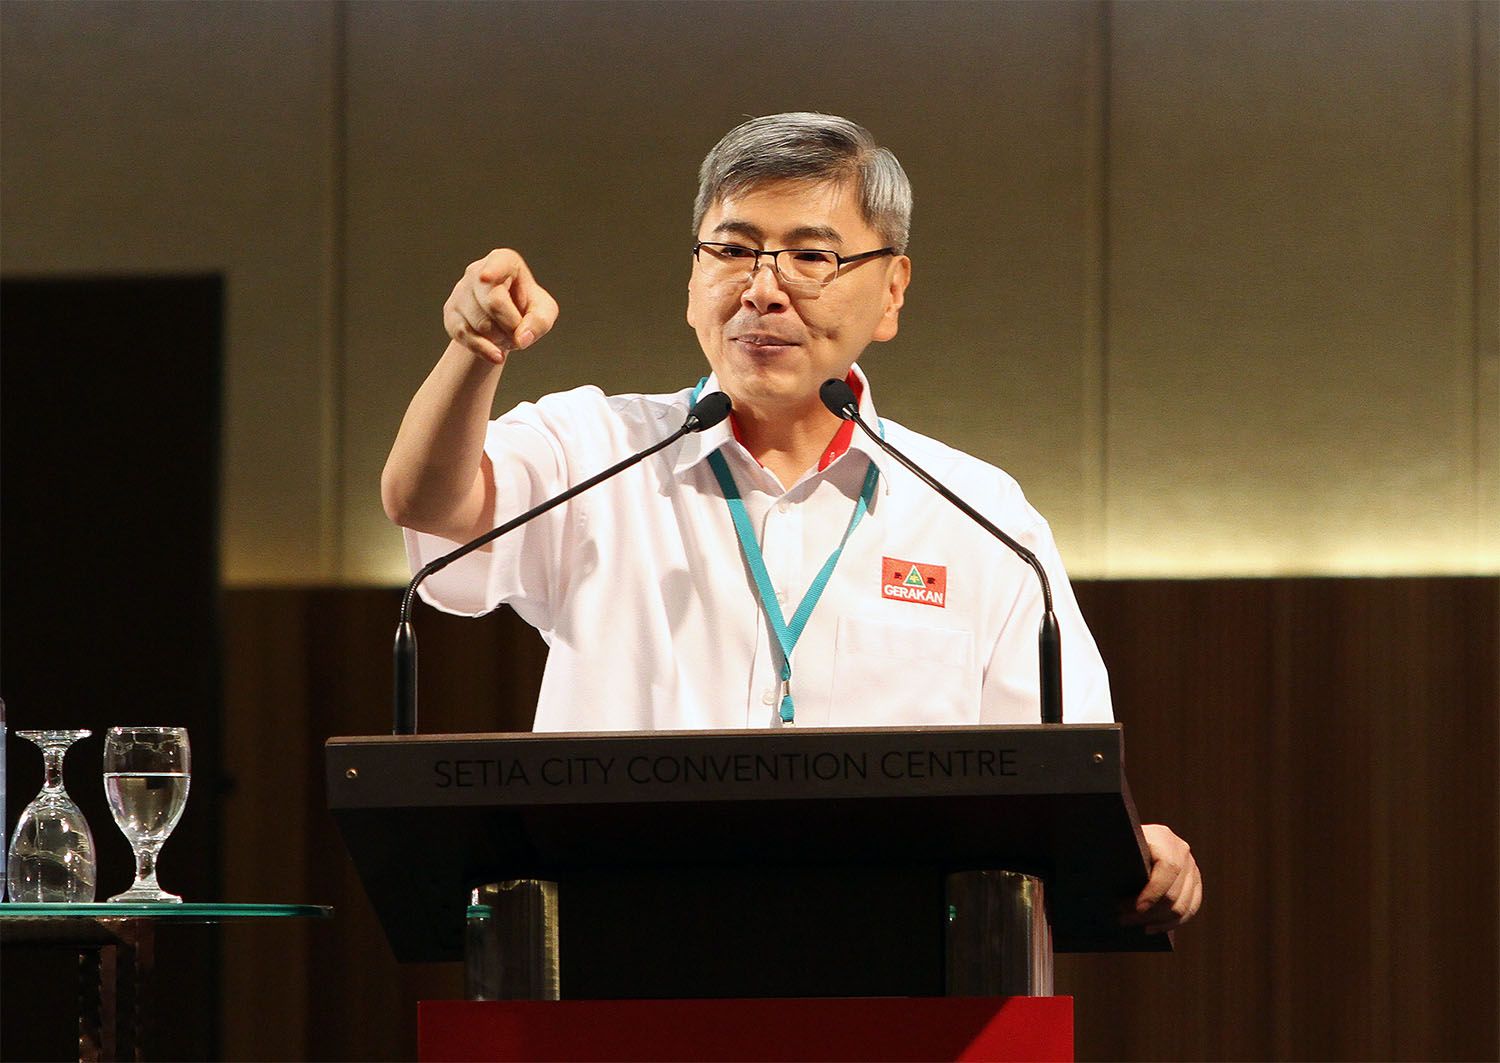 Gerakan President, Datuk Mah Siew Keong speaks at the partyu00e2u20acu2122s 43rd National Delegates Conference in Setia City Convention Centre, Shah Alam, October 19, 2014. u00e2u20acu201d Picture by Yusof Mat Isa